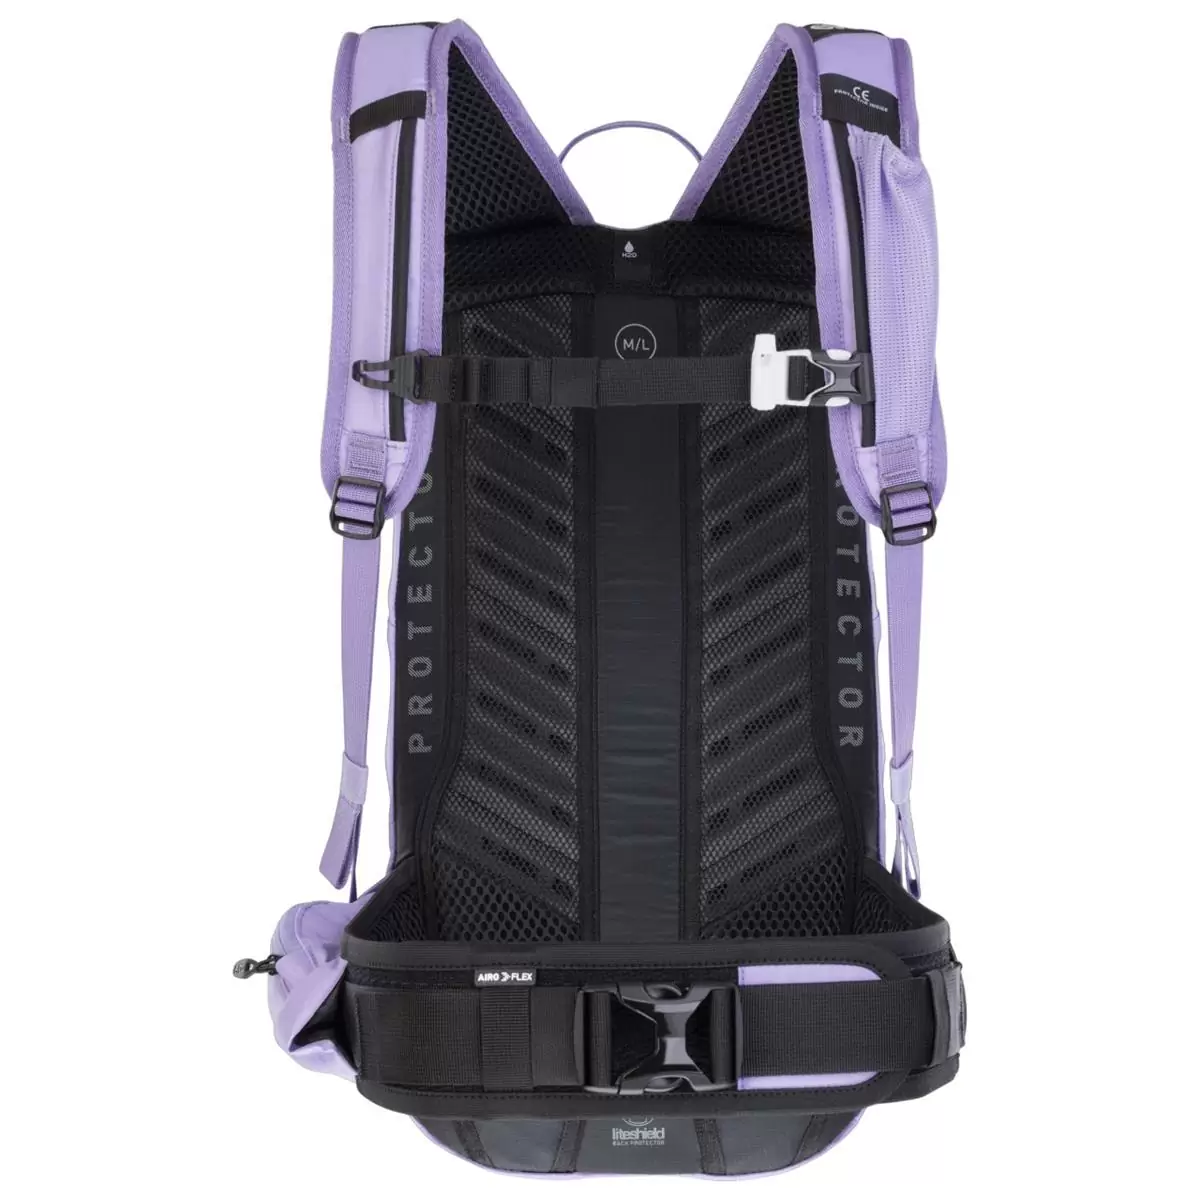 FR LITE RACE 10 Backpack With Back Protector 10L Purple Size M/L #1